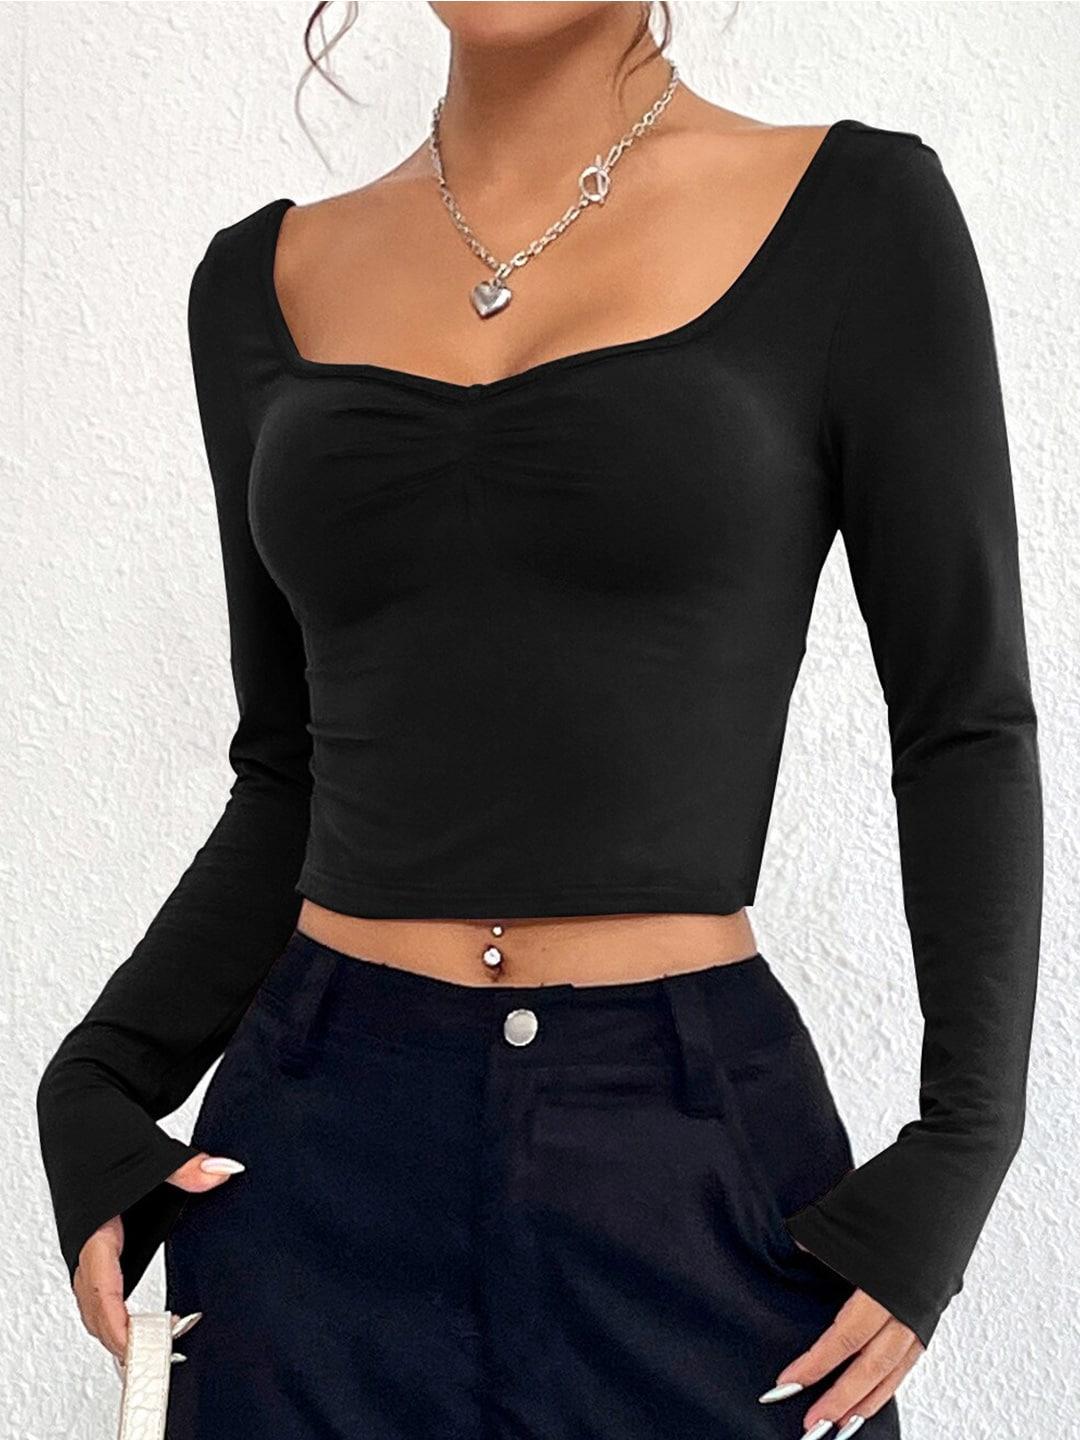 stylecast black round neck fitted crop top